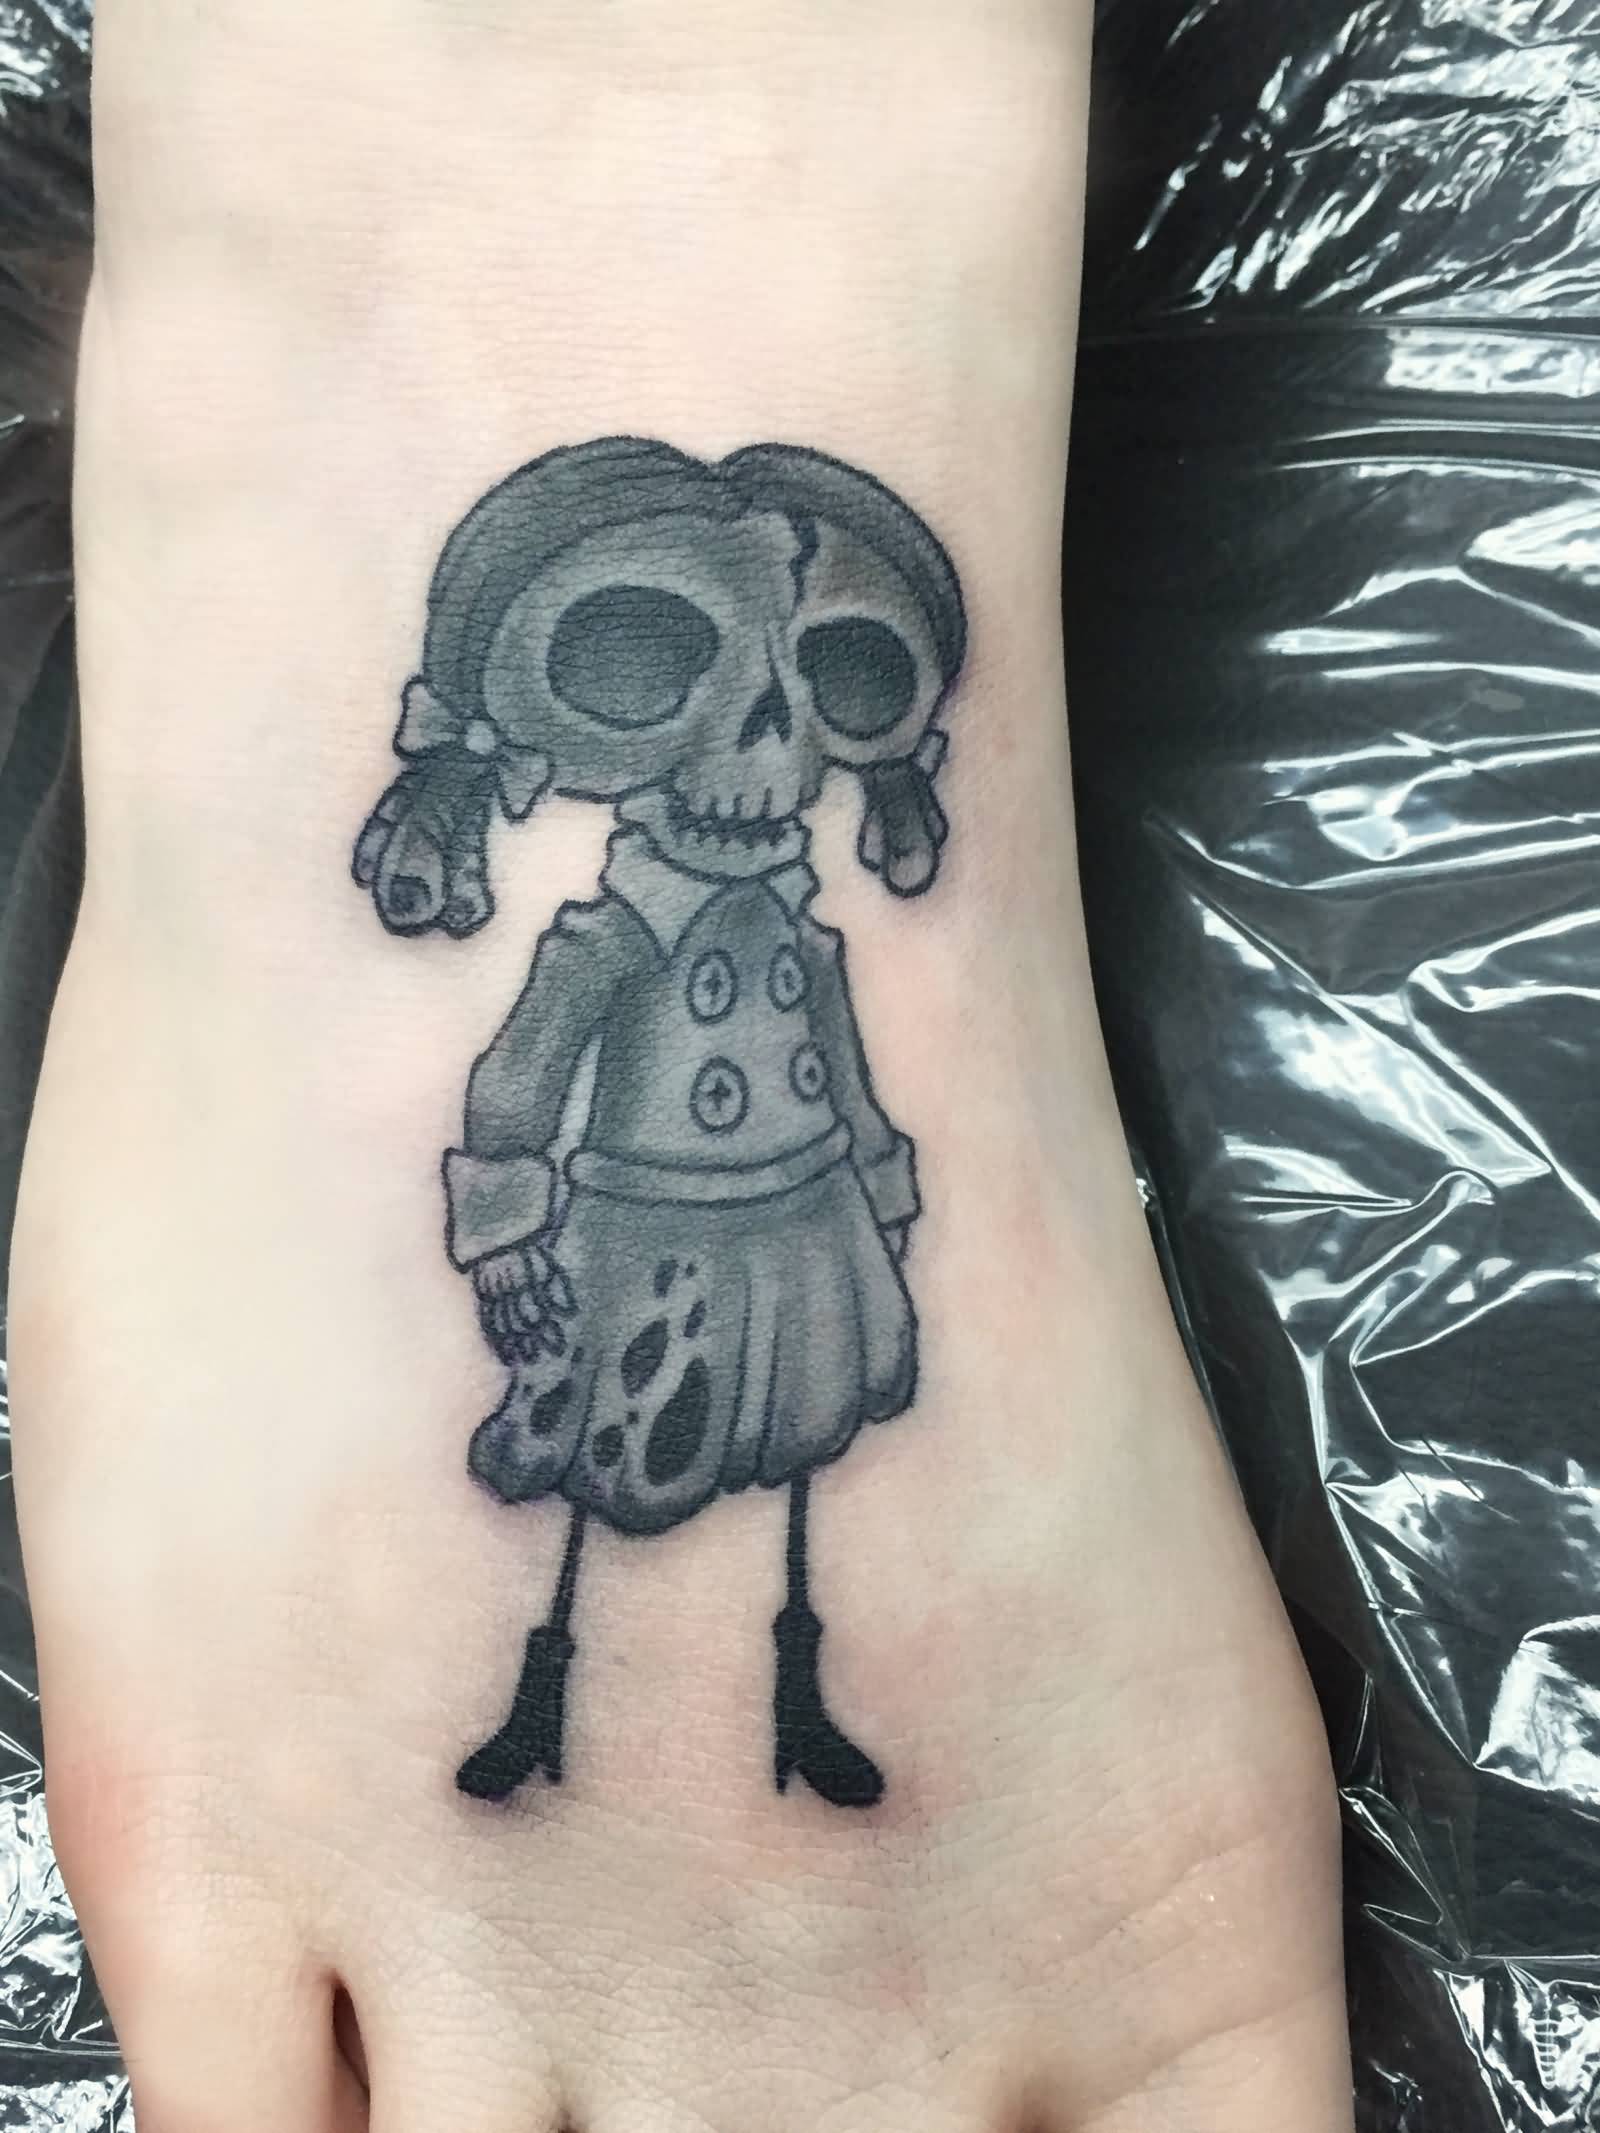 Black Ink Corpse Bride Tattoo On Right Foot